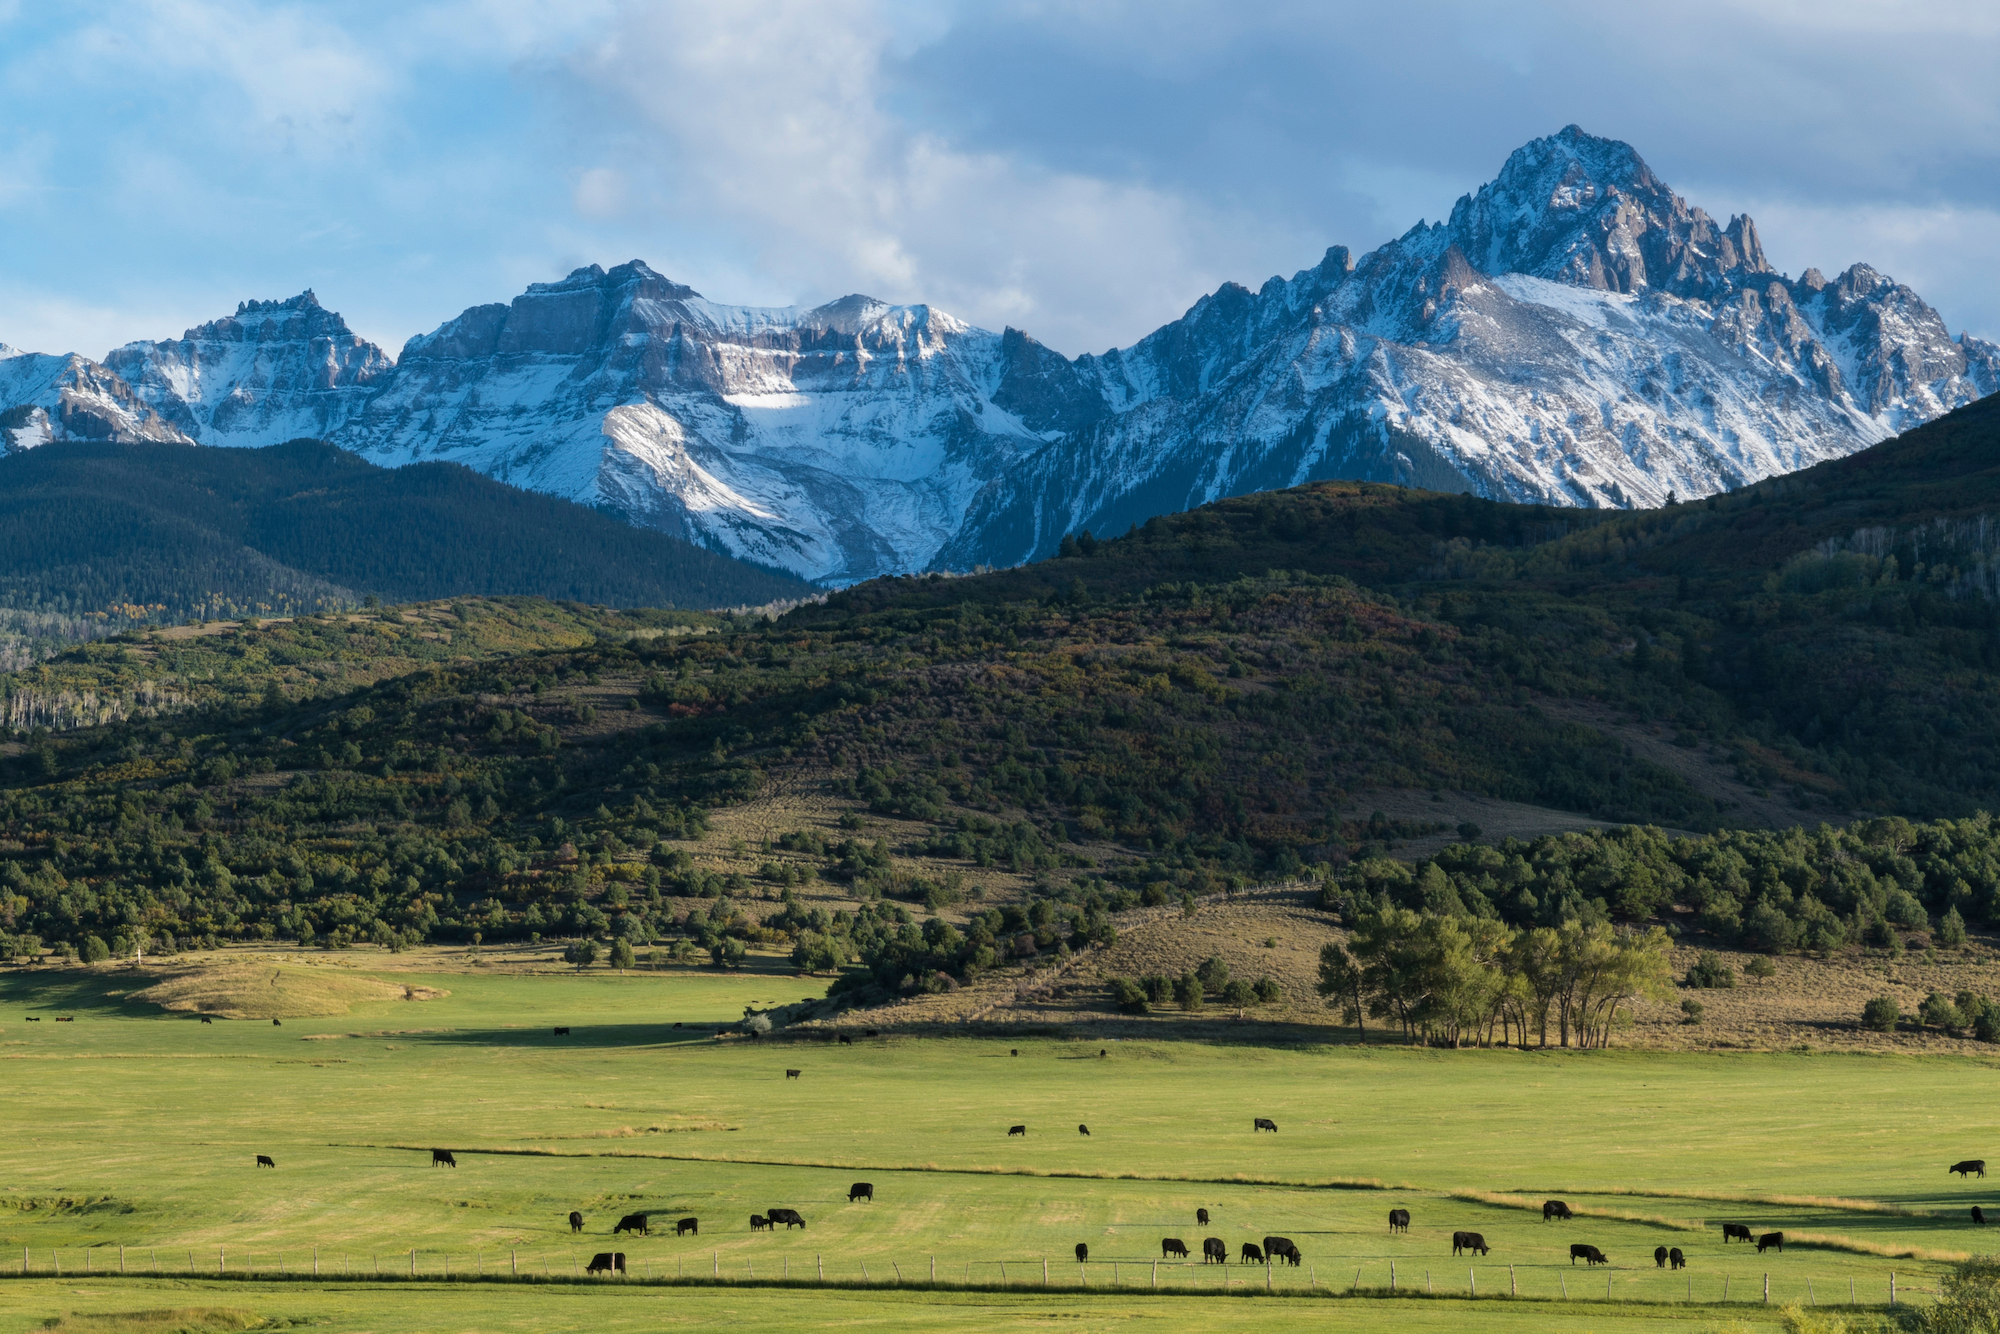 Promoting Biodiversity on Ranches: The Critical Role of Ranchers in Preserving Ecosystems